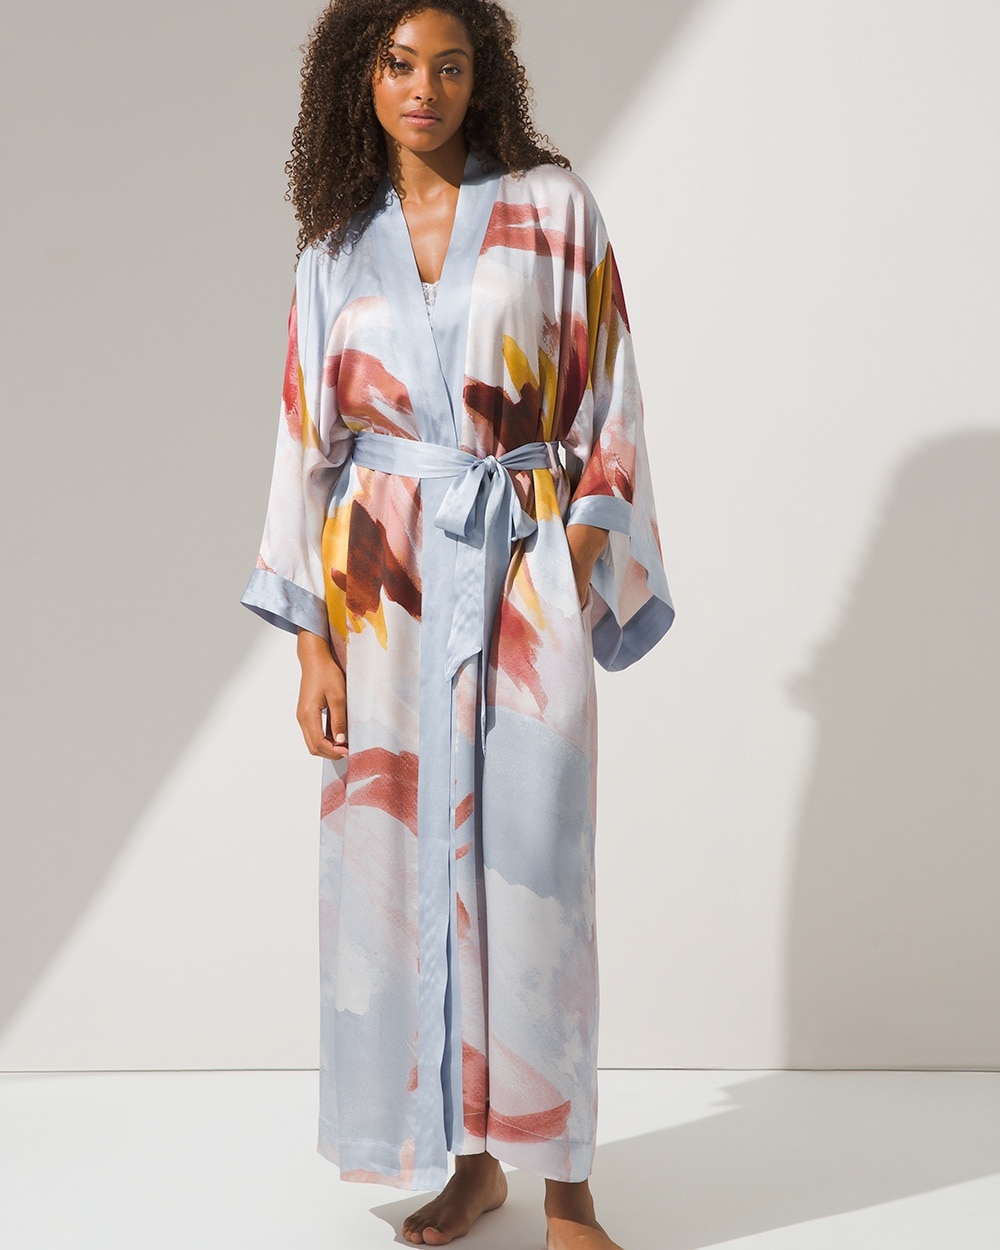 12 Best Silk Robes That Feel Extra Luxurious 2021